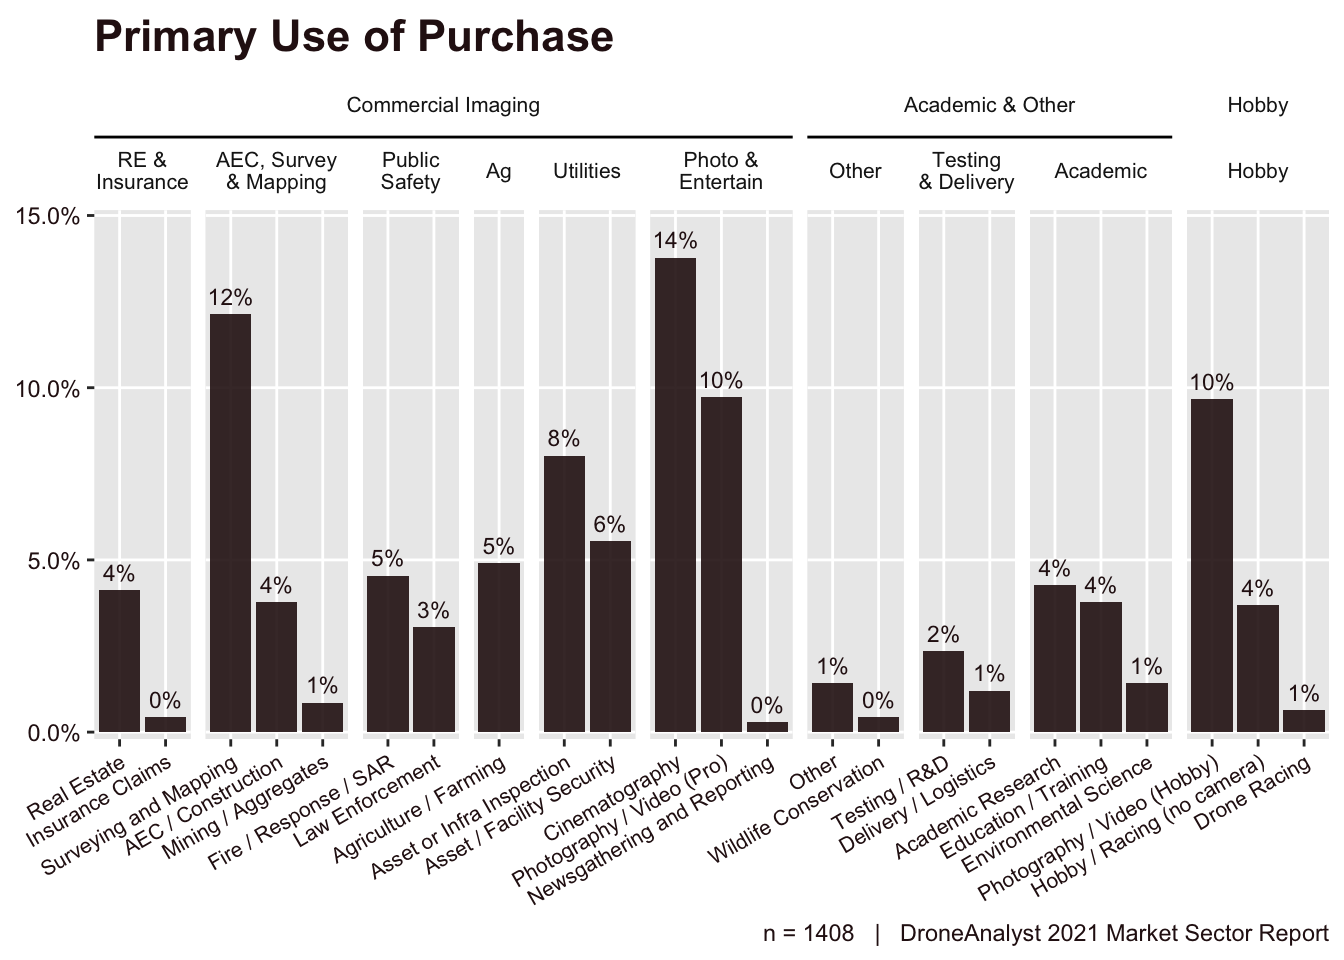 Primary Use of Purchase